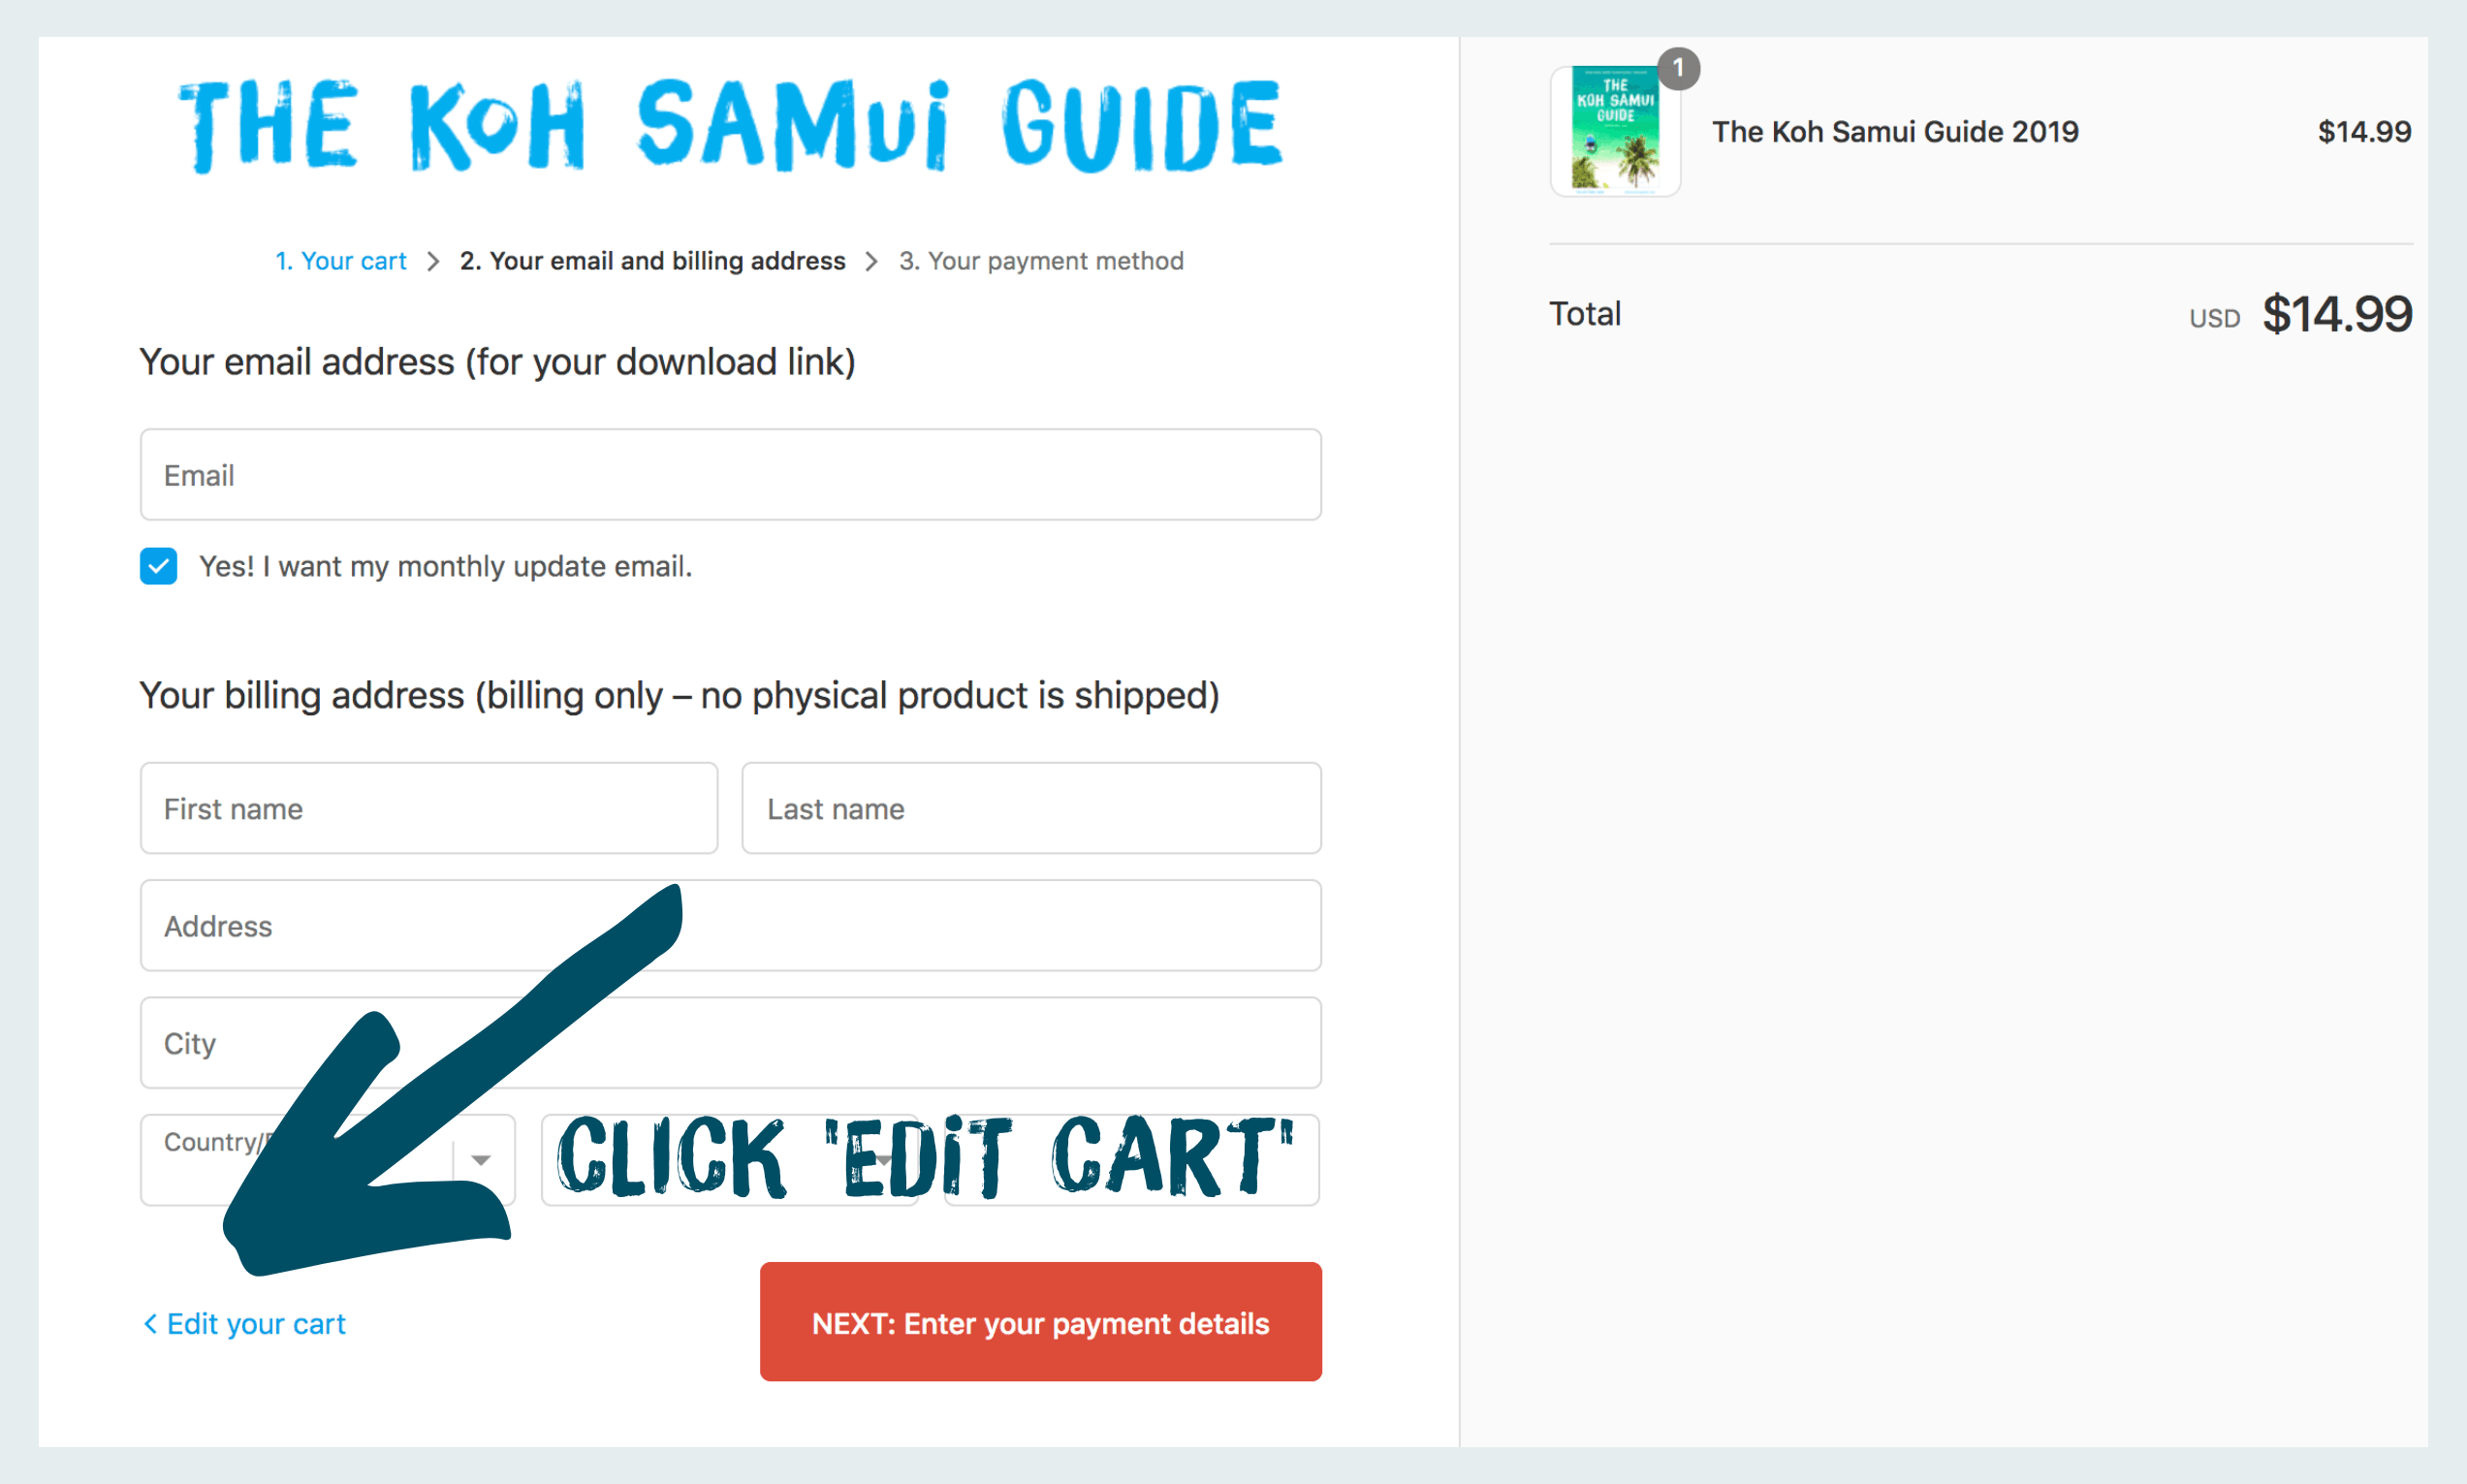 Step-by-step instructions for how to purchase The Koh Samui Guide with PayPal: If you don't see a PayPal button at the secure checkout